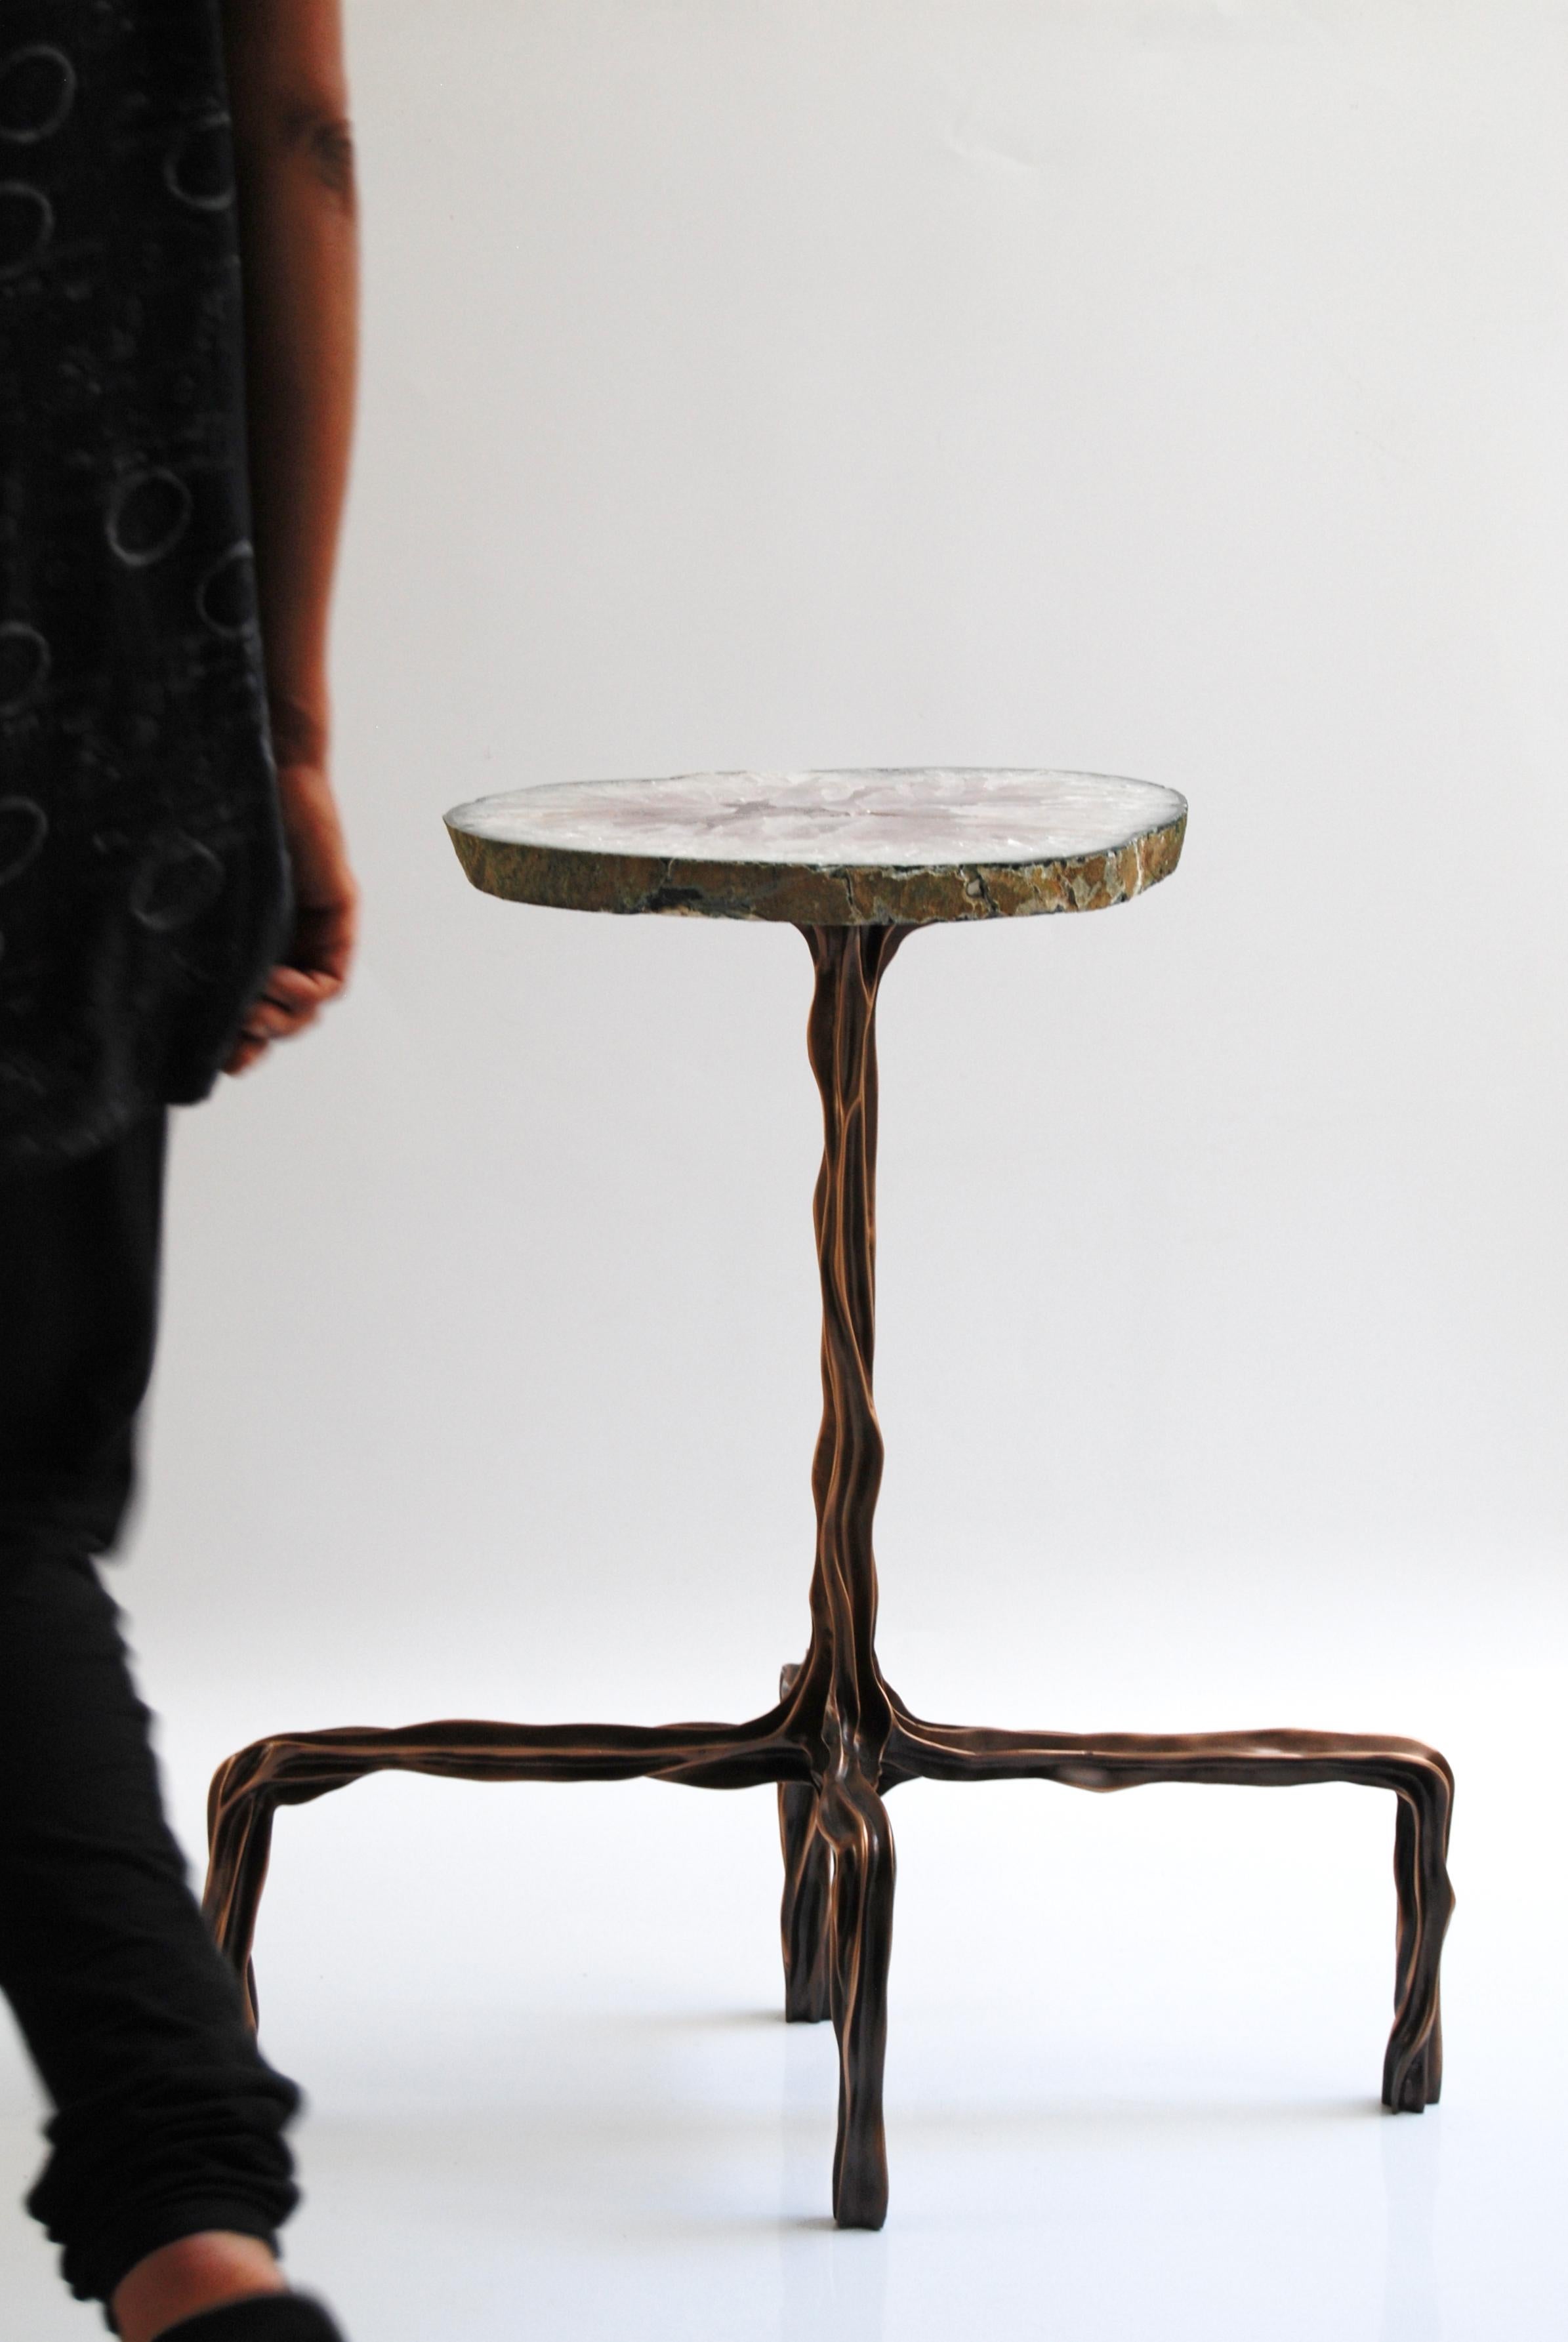 Contemporary Dark Bronze Side Table with Onyx Top by FAKASAKA Design